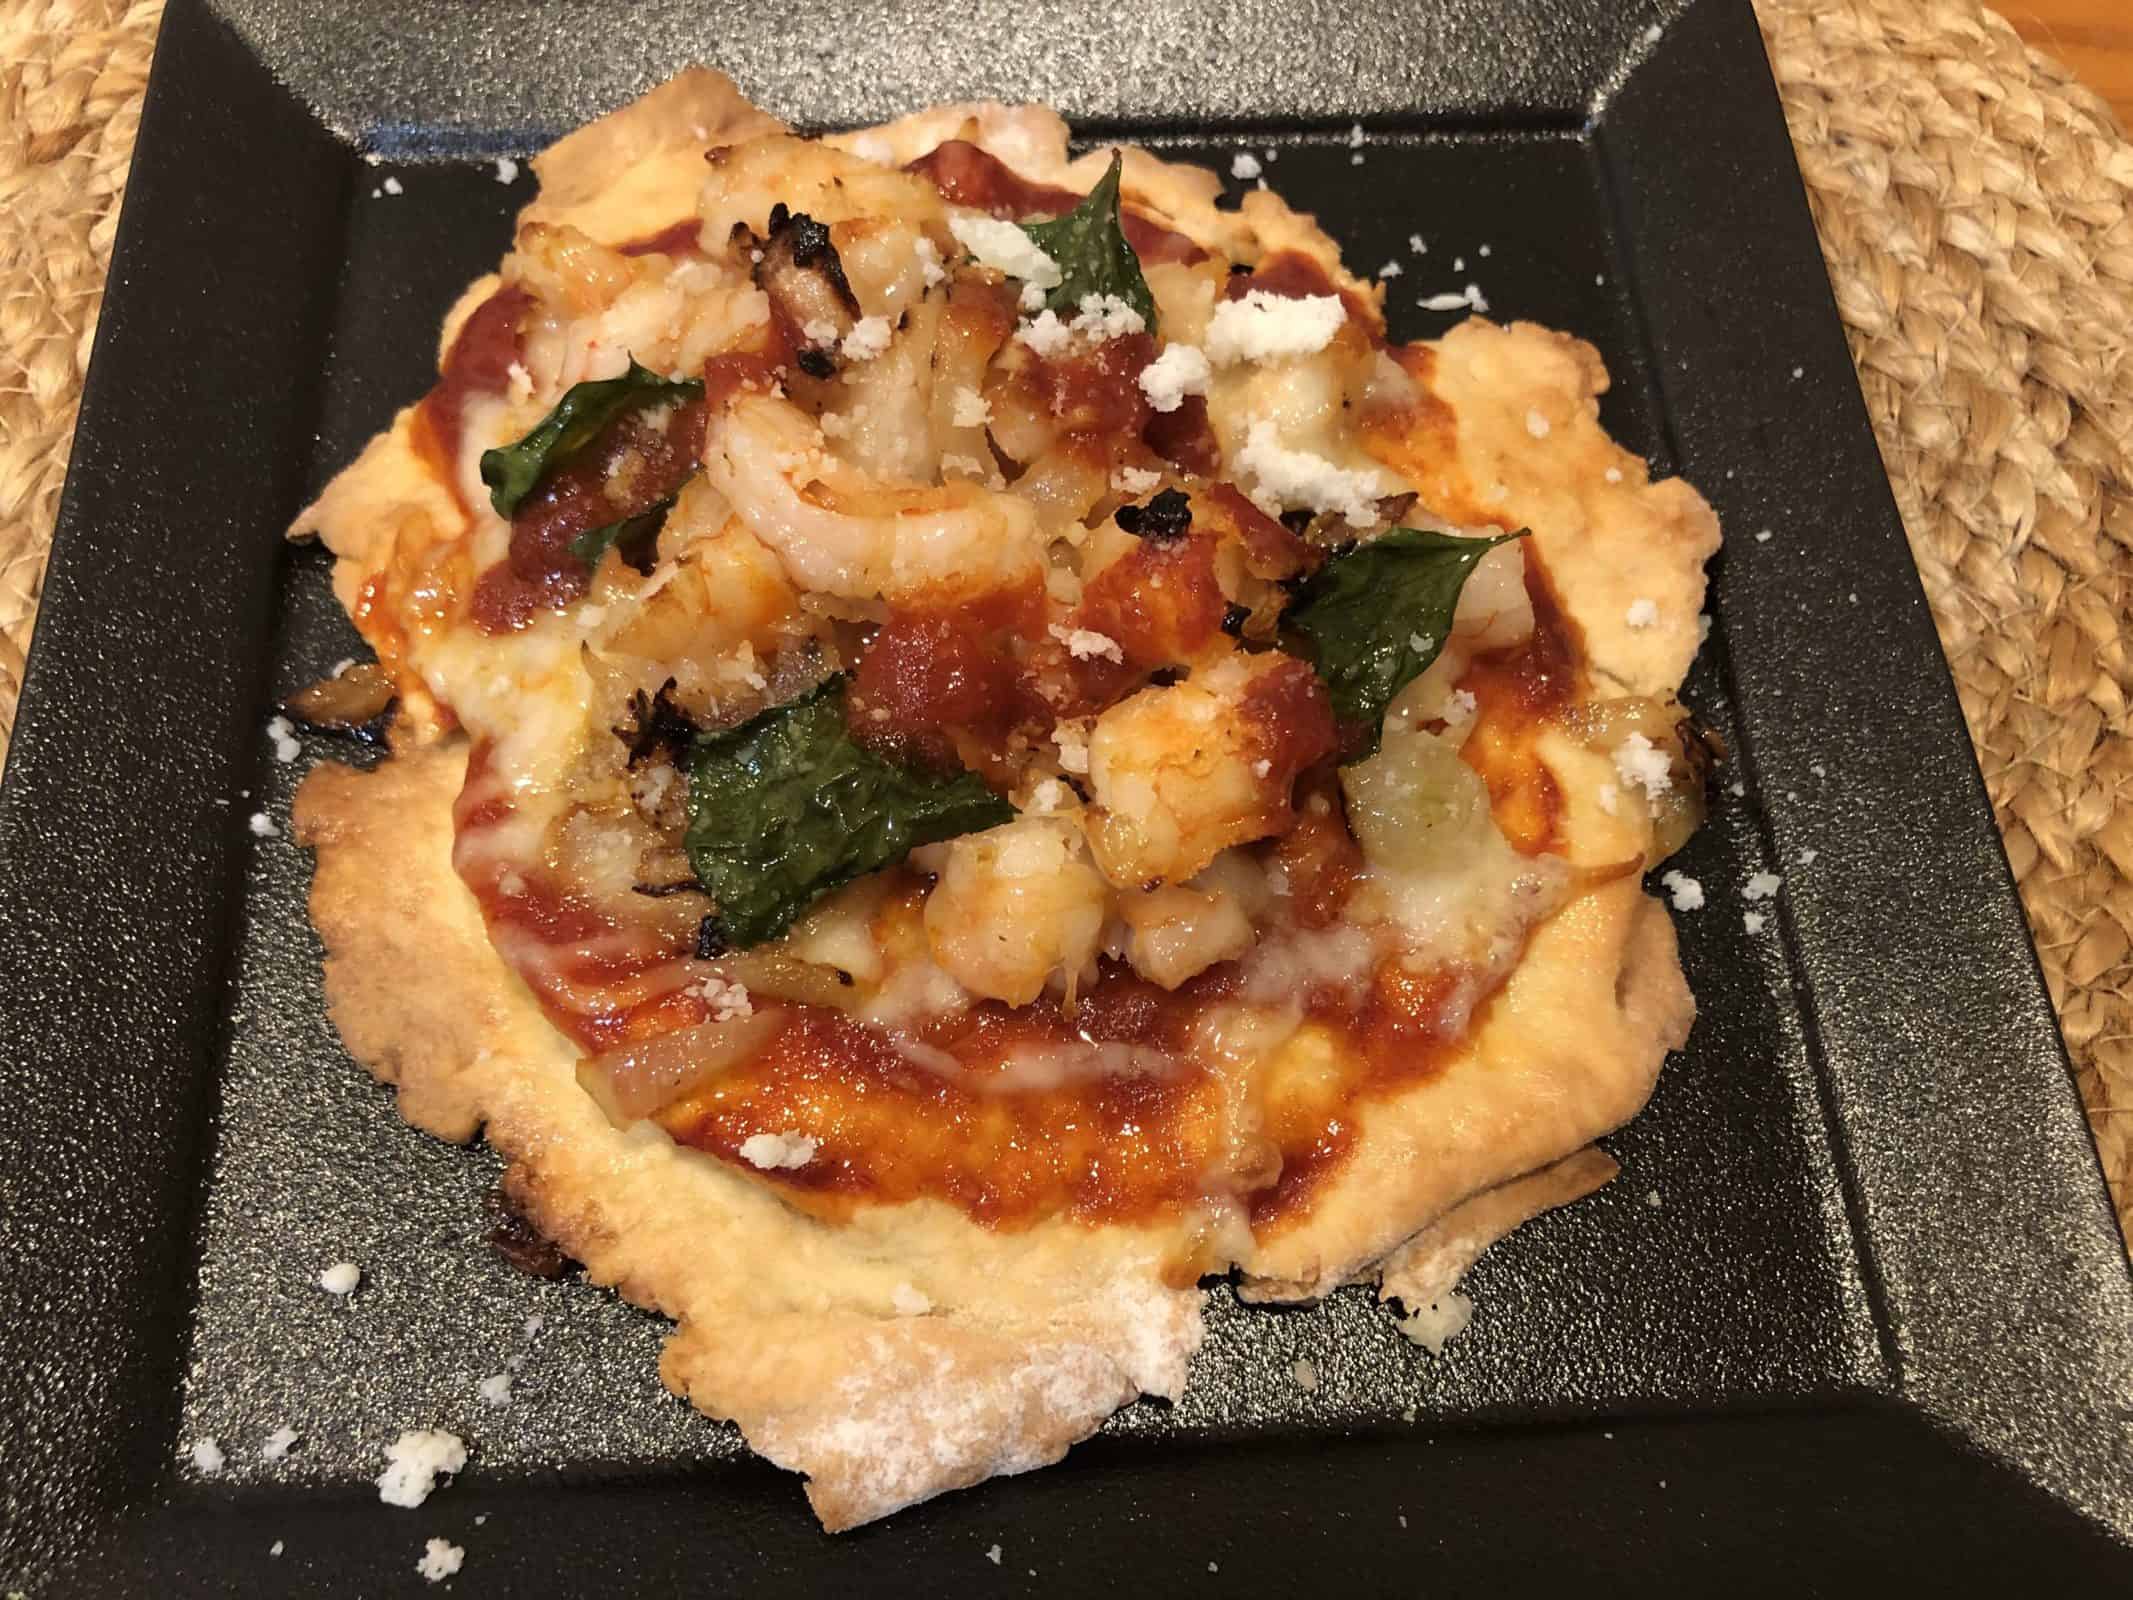 Homemade Artisan Style Shrimp Pizza on a black plate on a wicker placemat